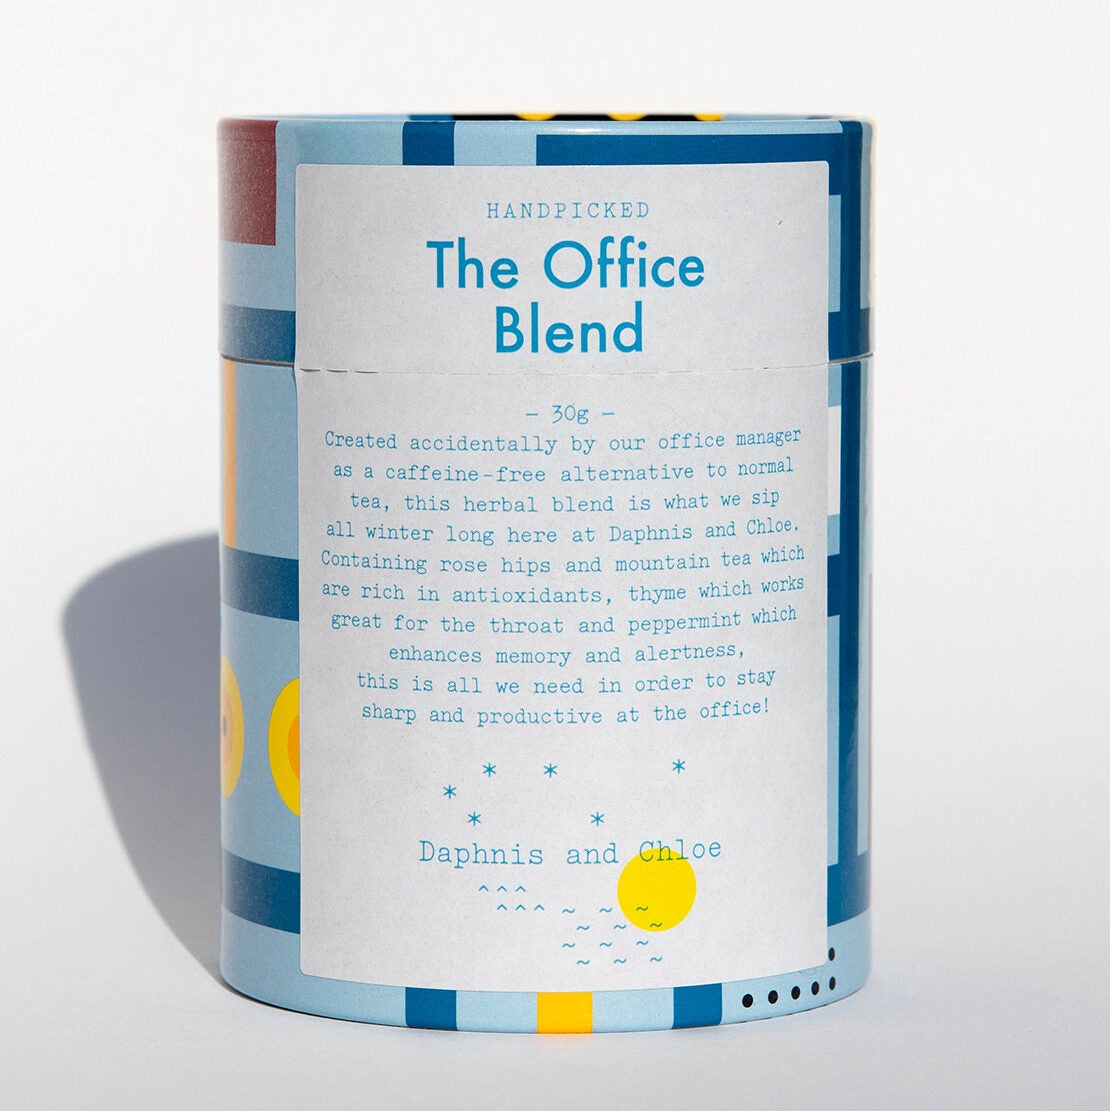 Caffeine free herbal blend packaged in a light blue cylinder case against a white background.